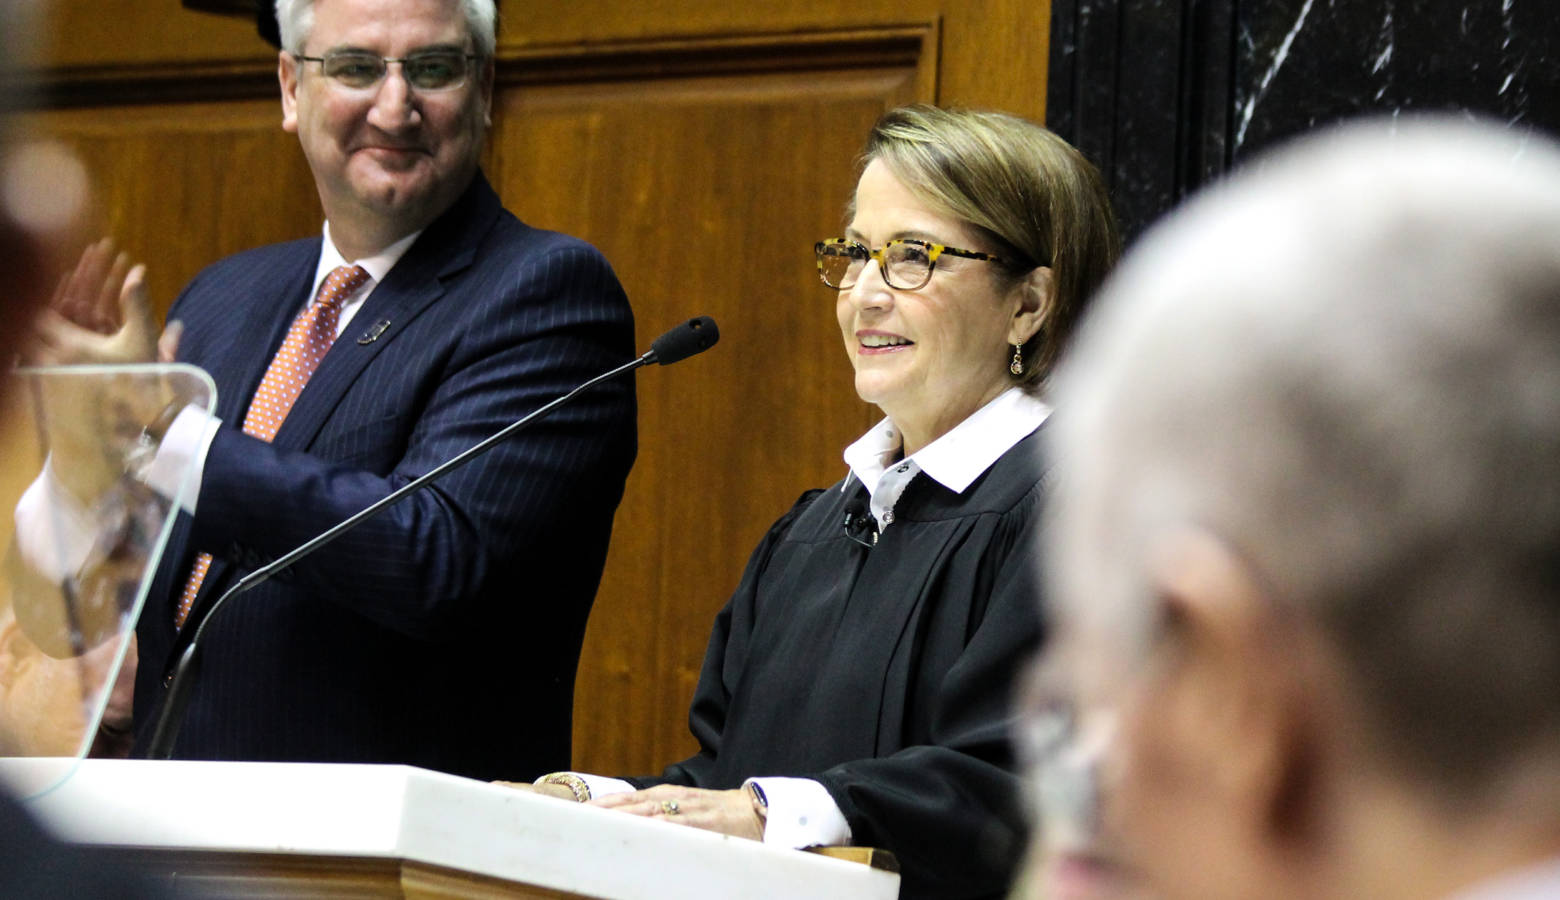 Indiana Chief Justice Loretta Rush delivers her 2020 State of the Judiciary Address. (Lauren Chapman/IPB News)